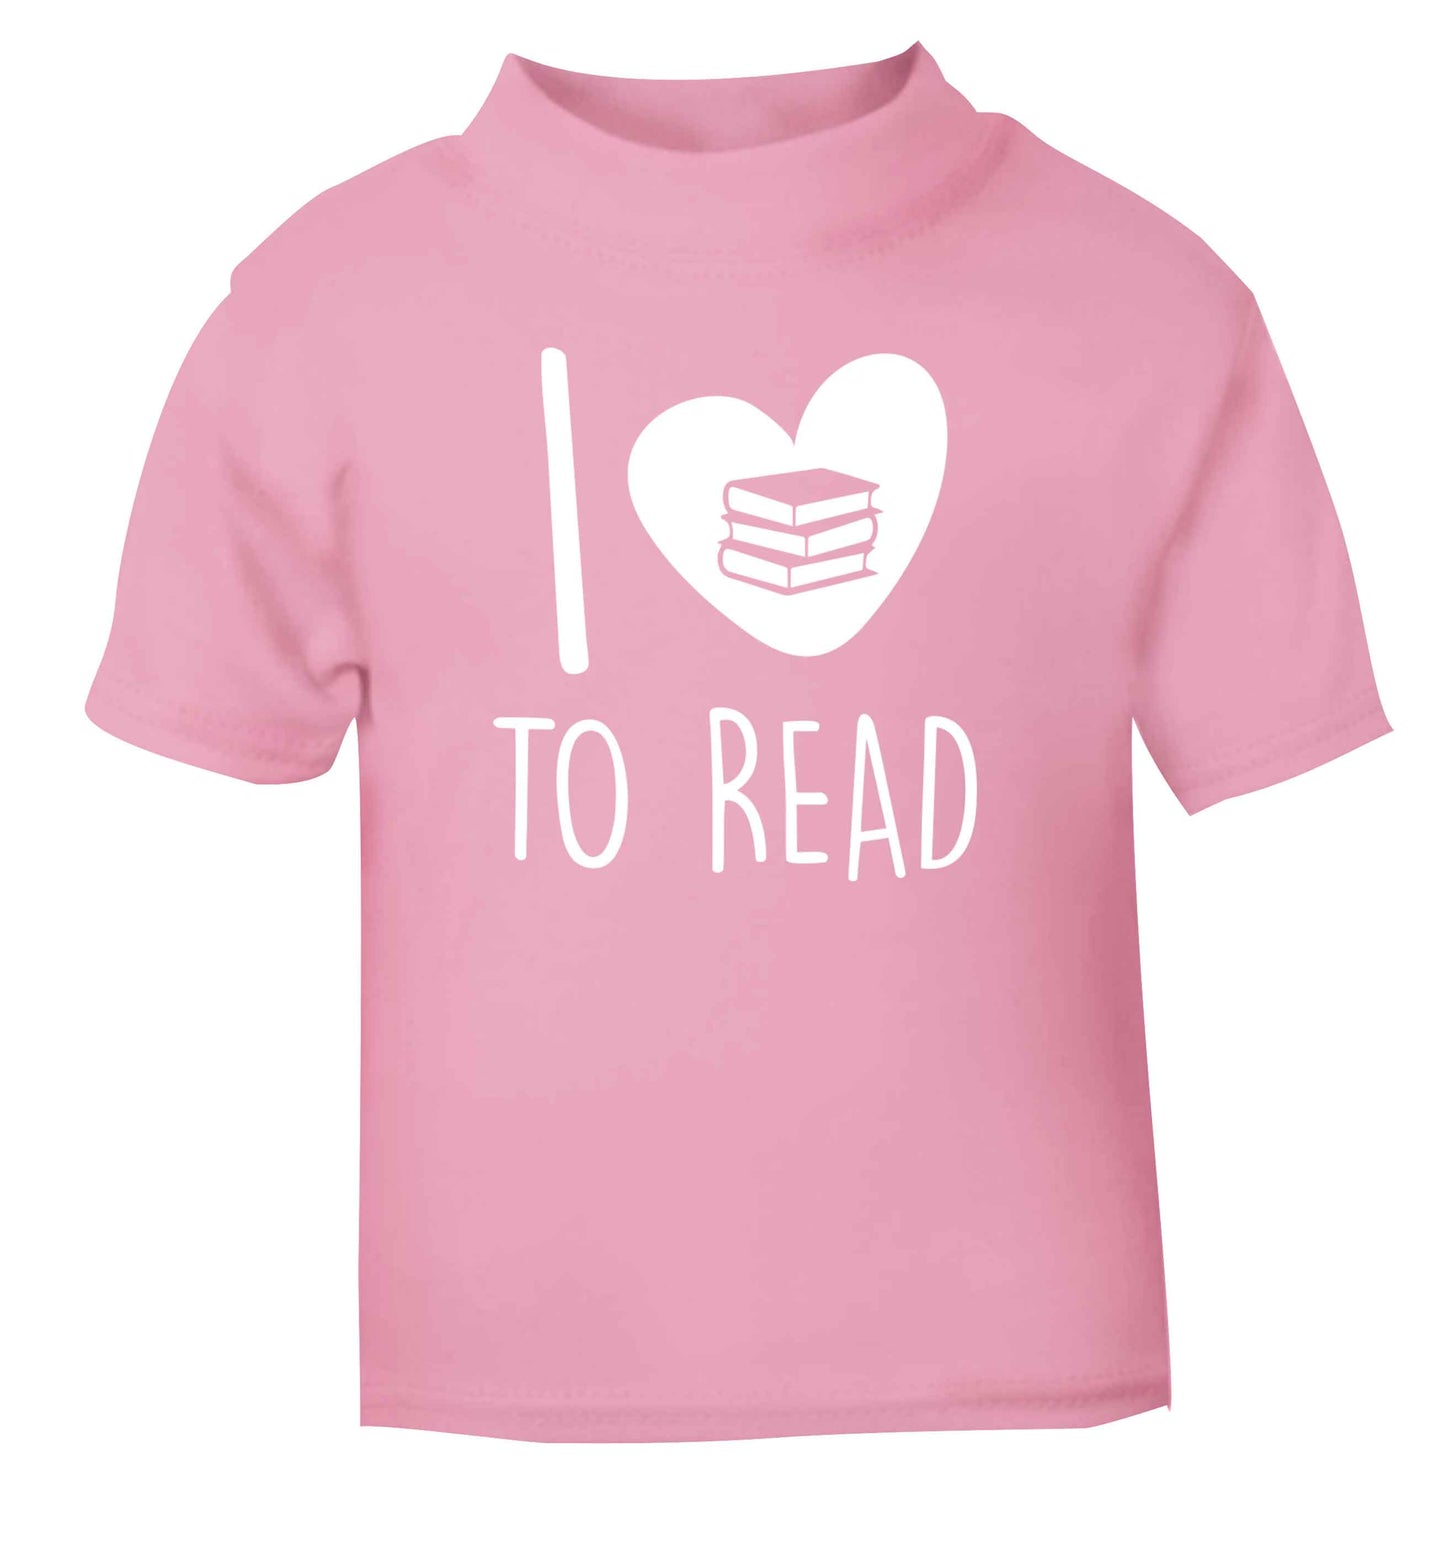 I love to read light pink Baby Toddler Tshirt 2 Years